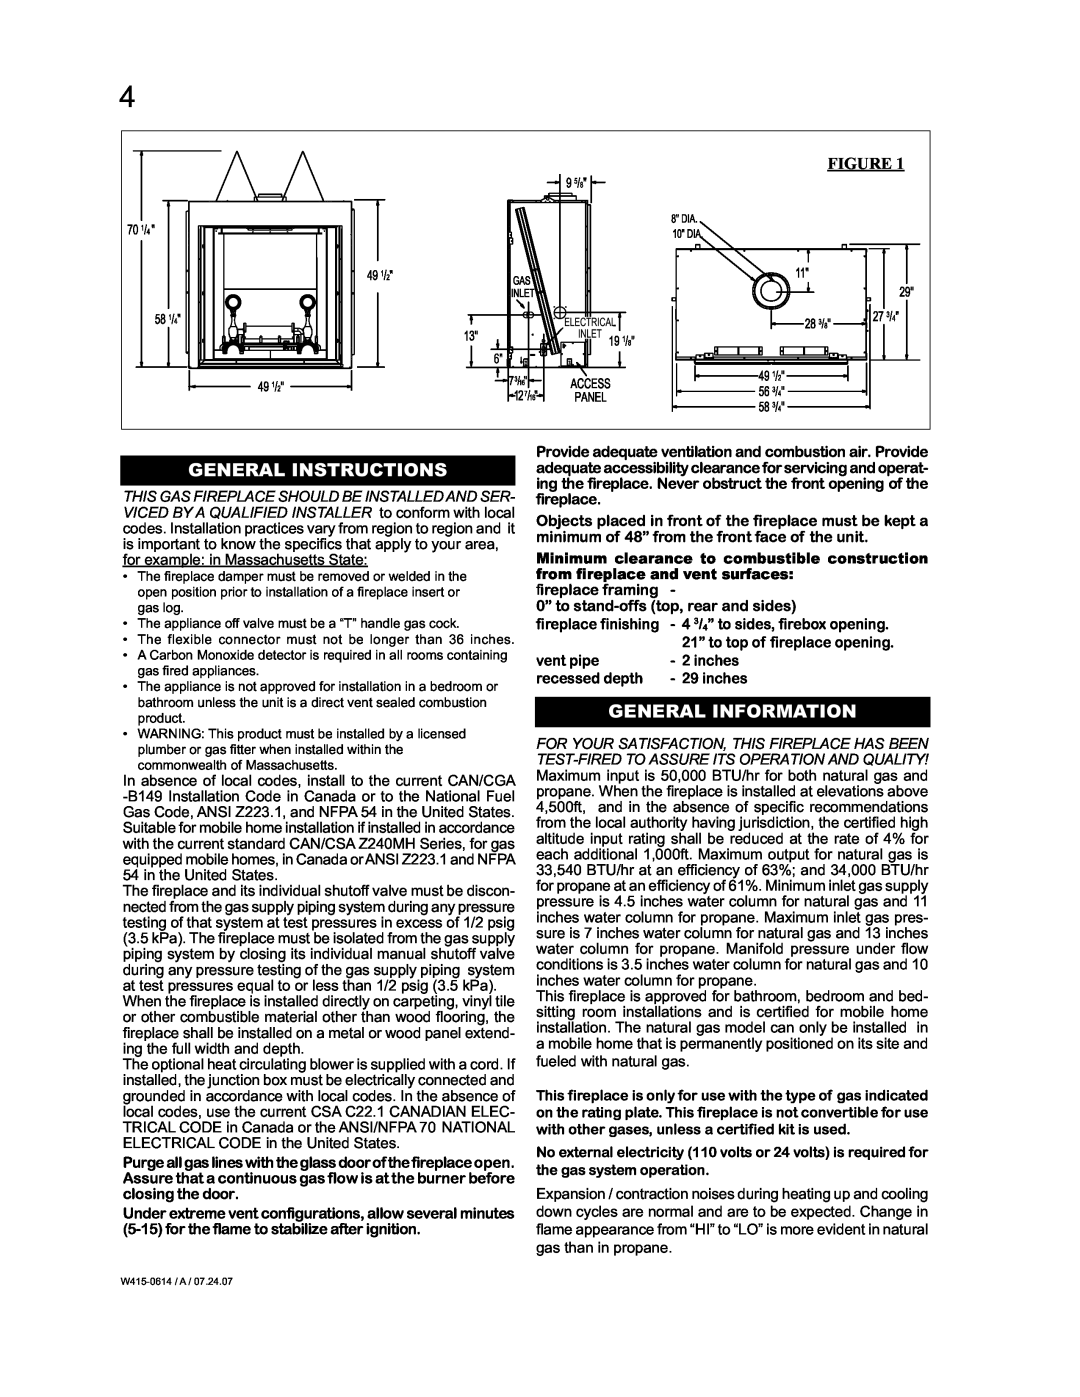 Napoleon Fireplaces BGD90PT, BGD90NT manual General Instructions, General Information 